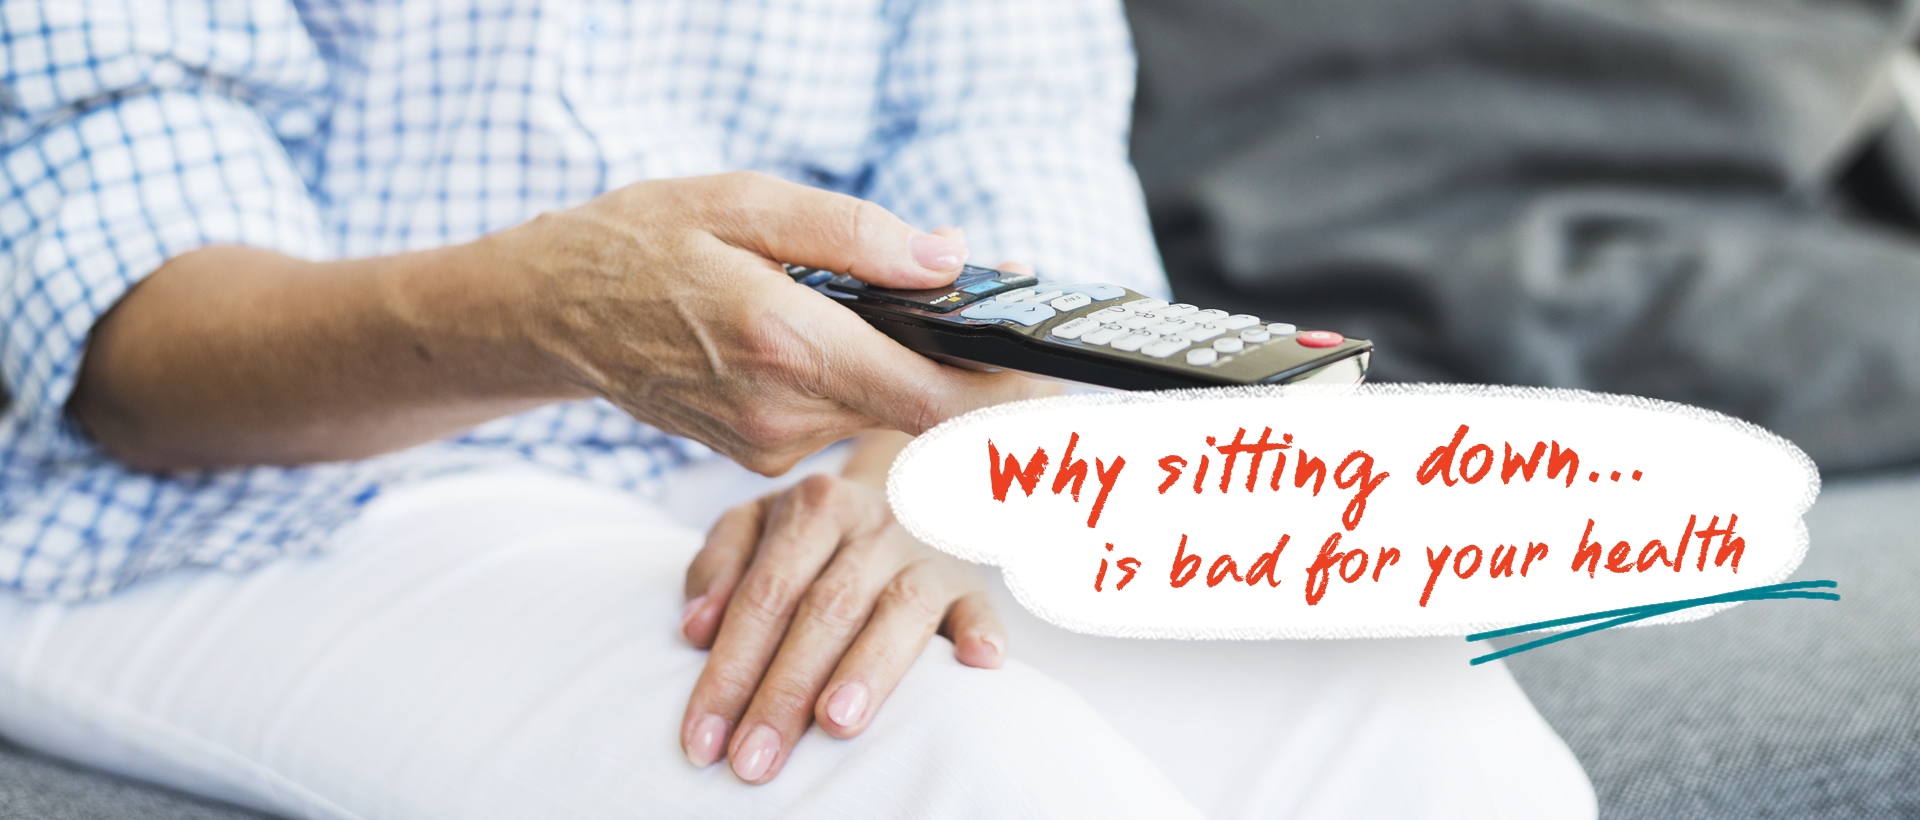 Why sitting down is bad for your health